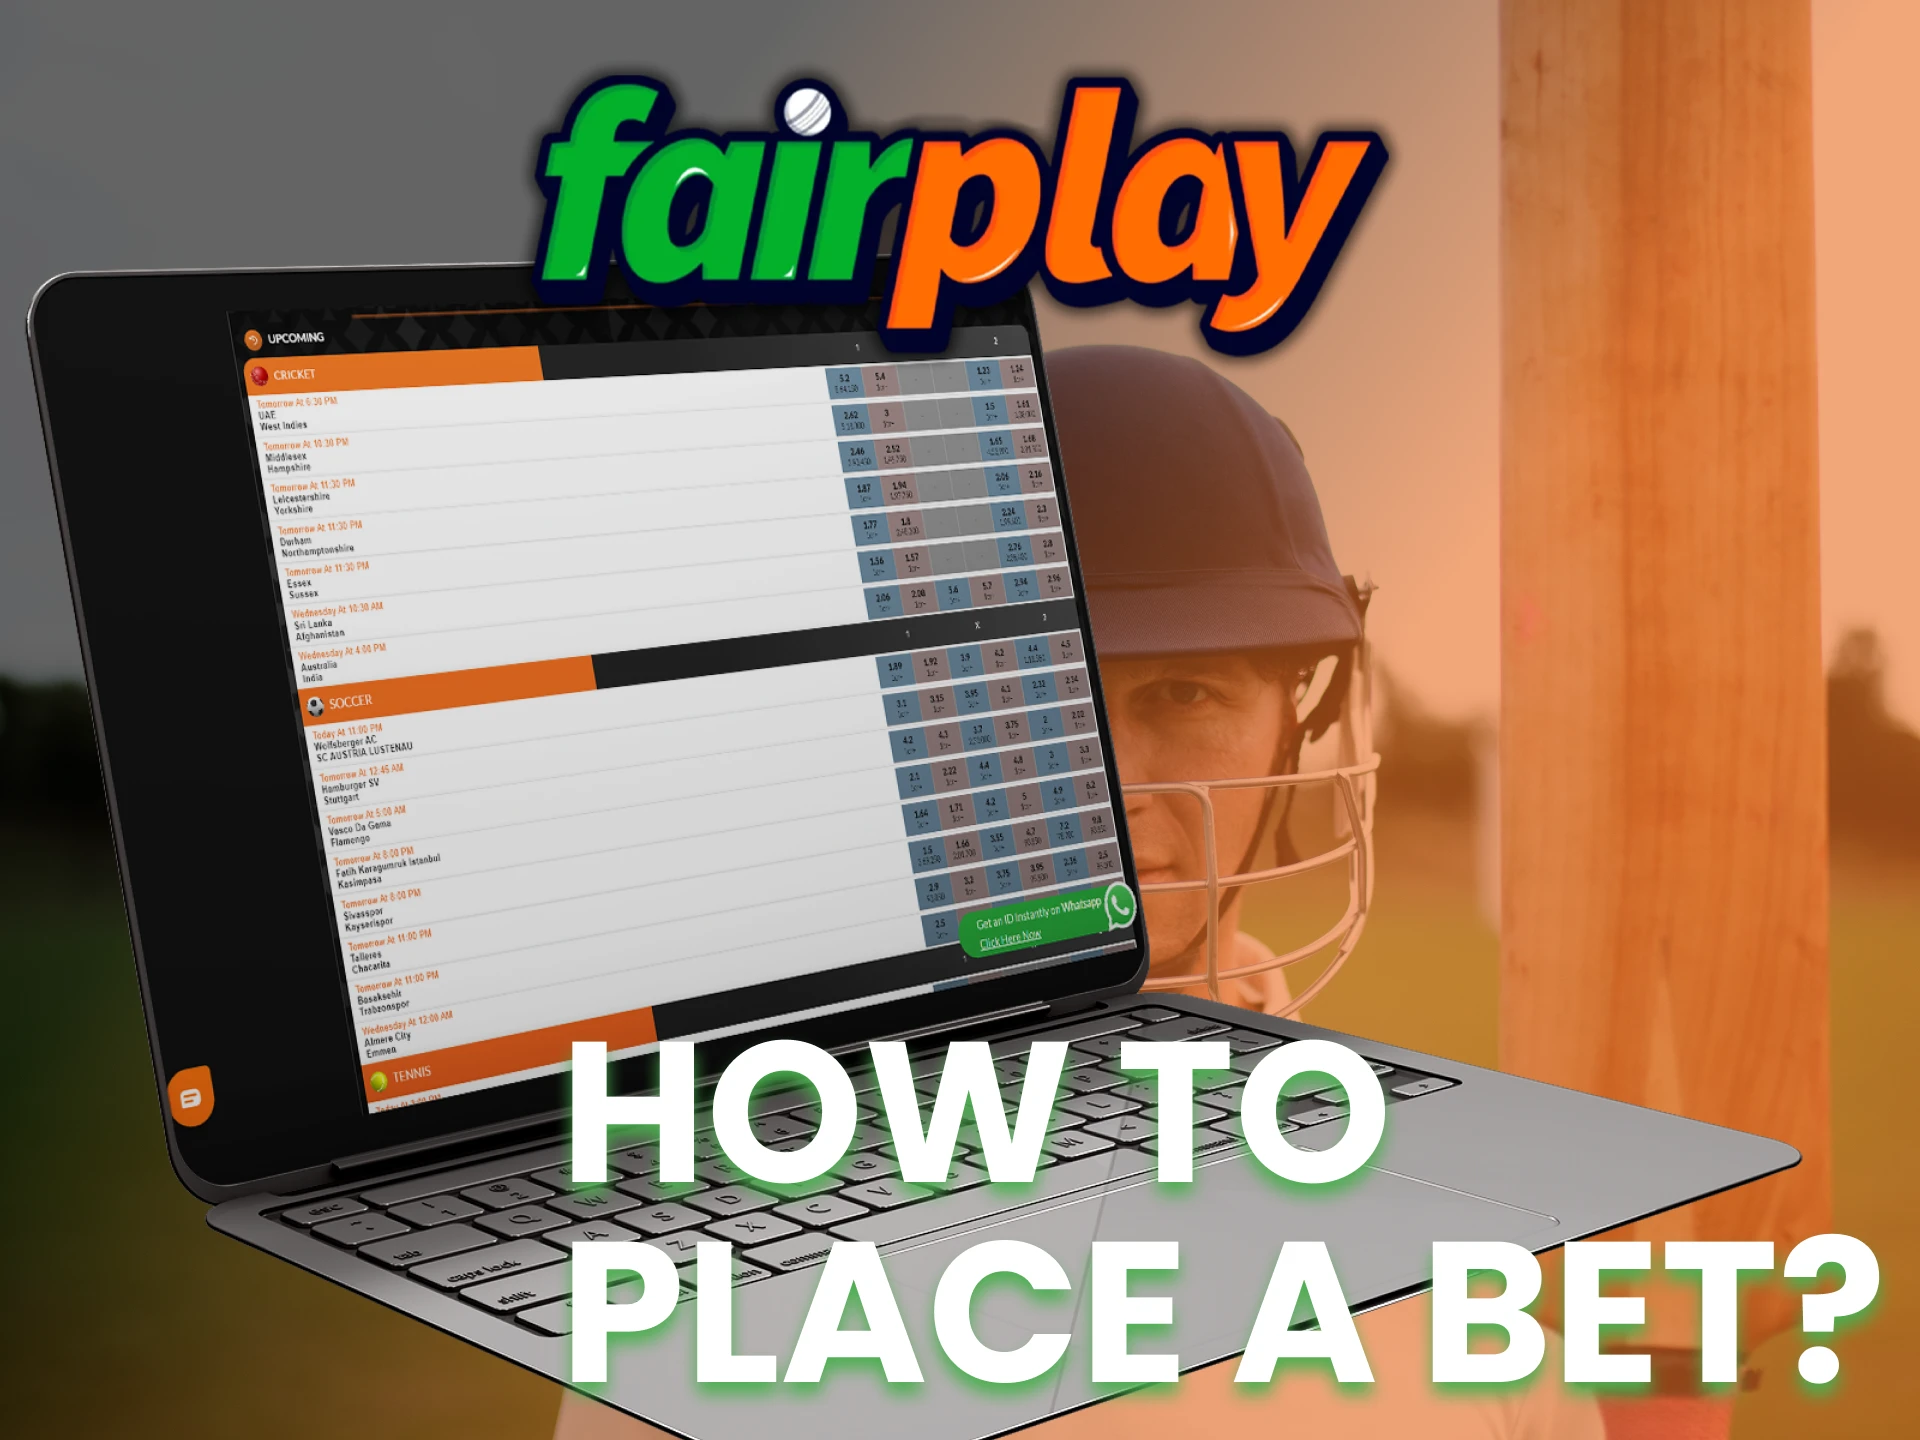 It's easy to make bets at the Fairplay.